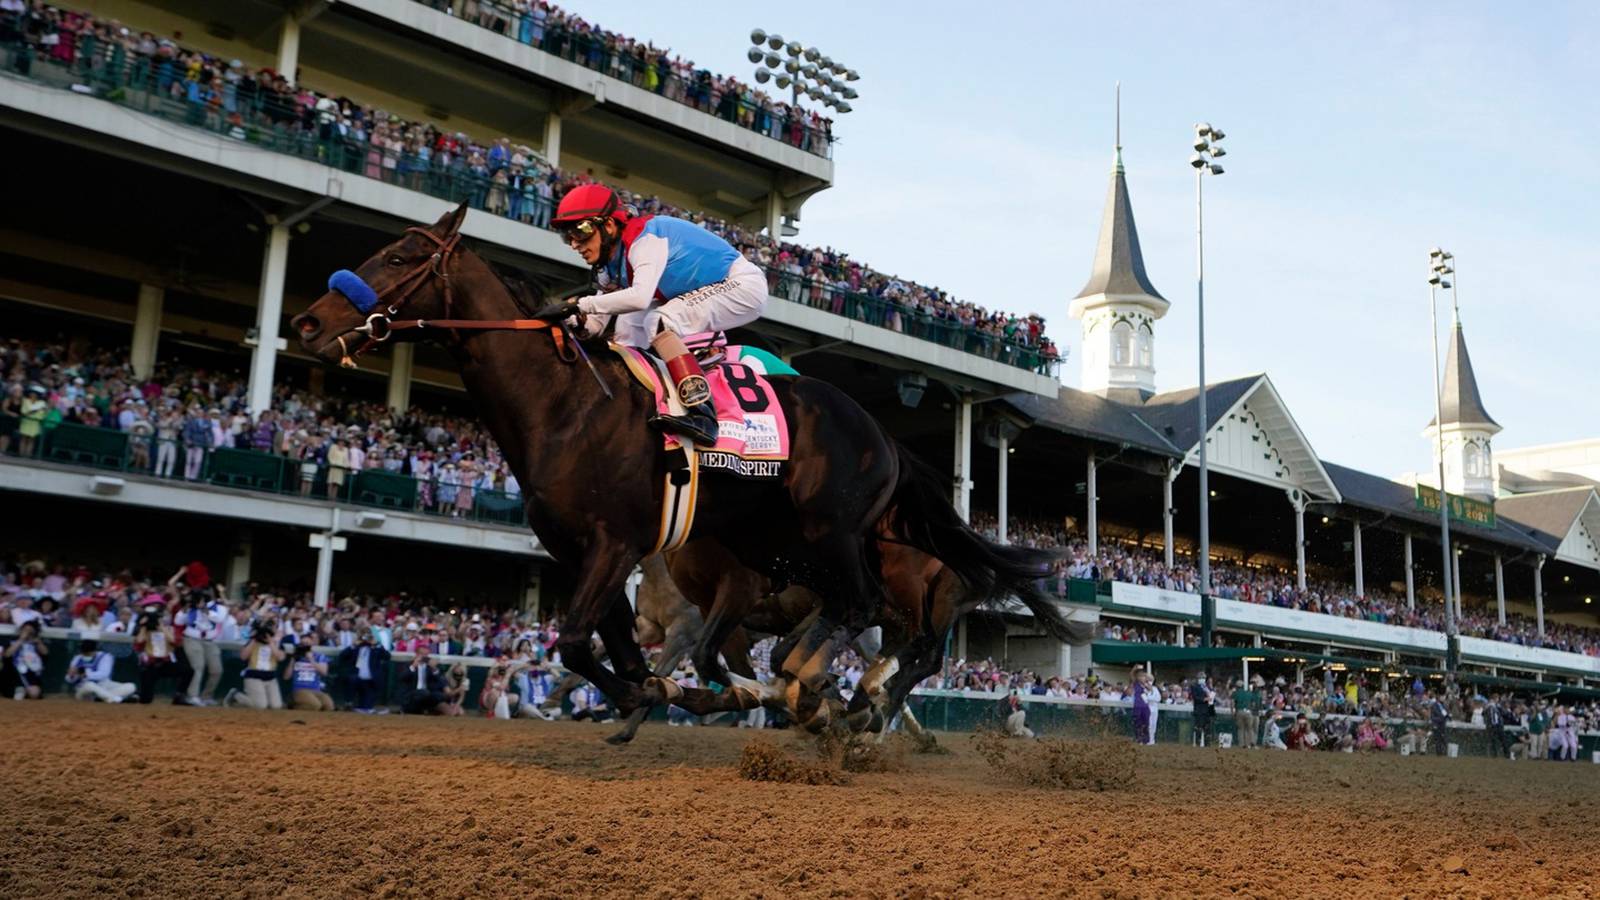 Kentucky Derby drug positive the latest scandal in US racing The